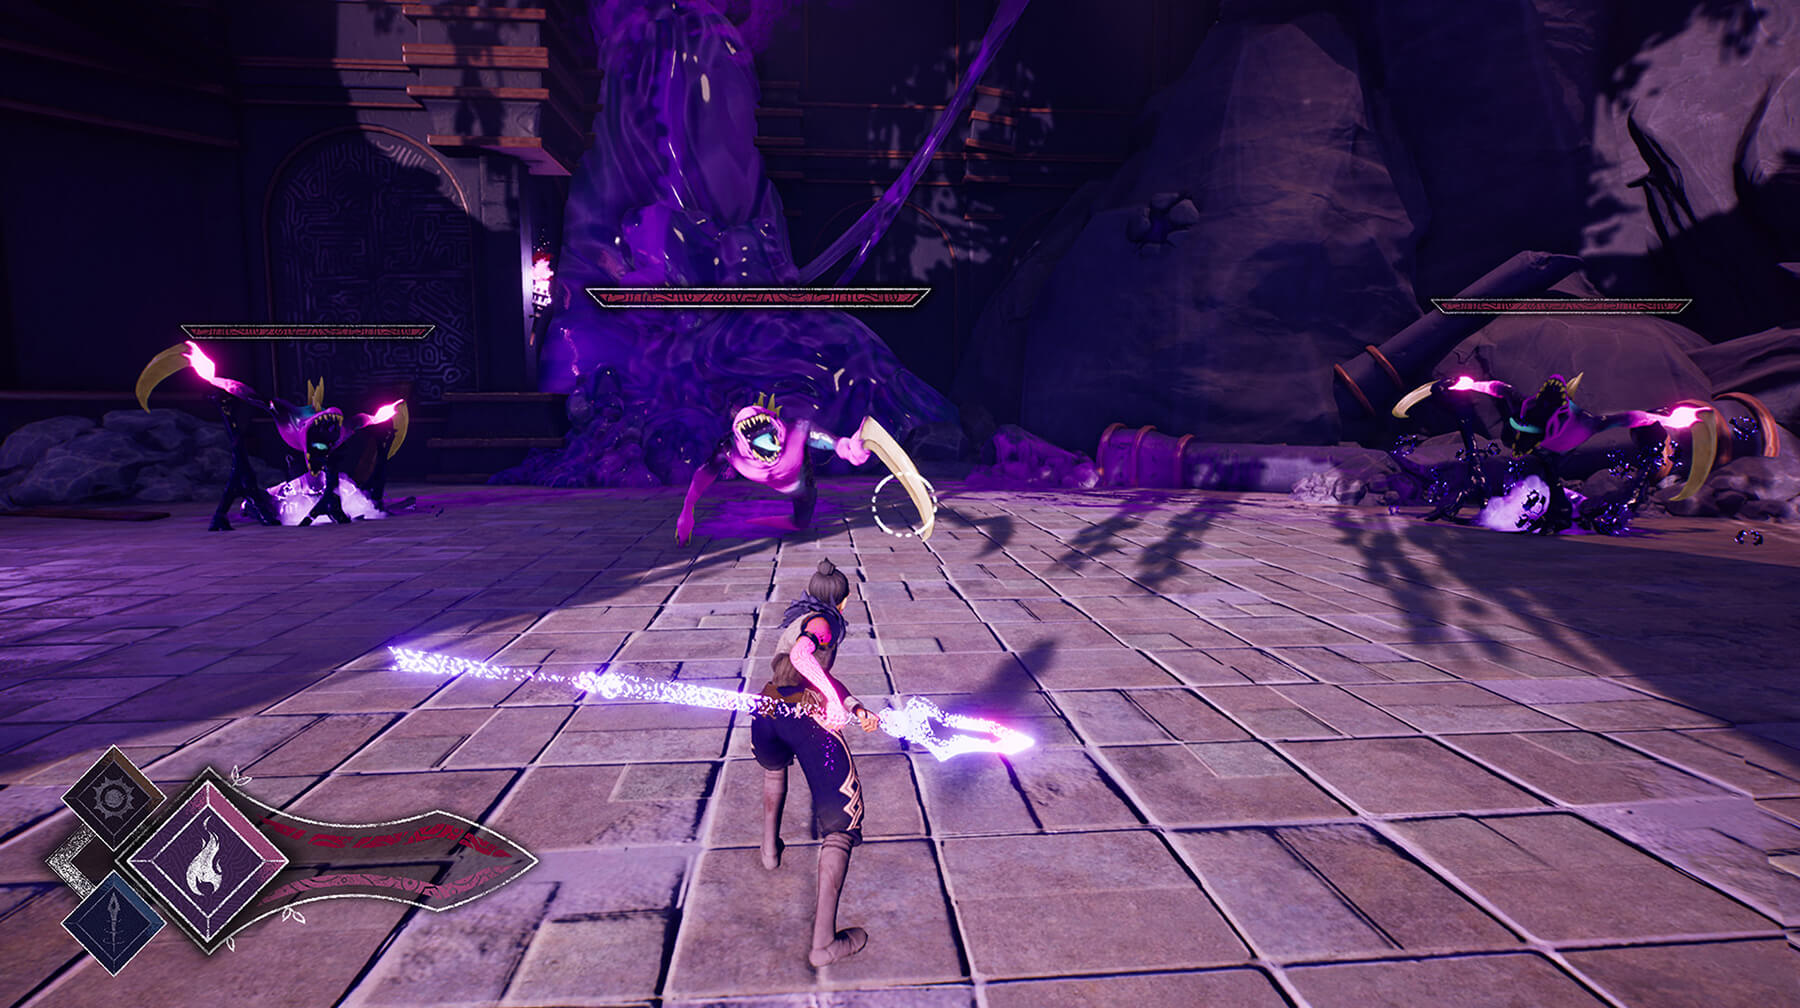 Cyrah wields her spear as she faces three approaching enemies.